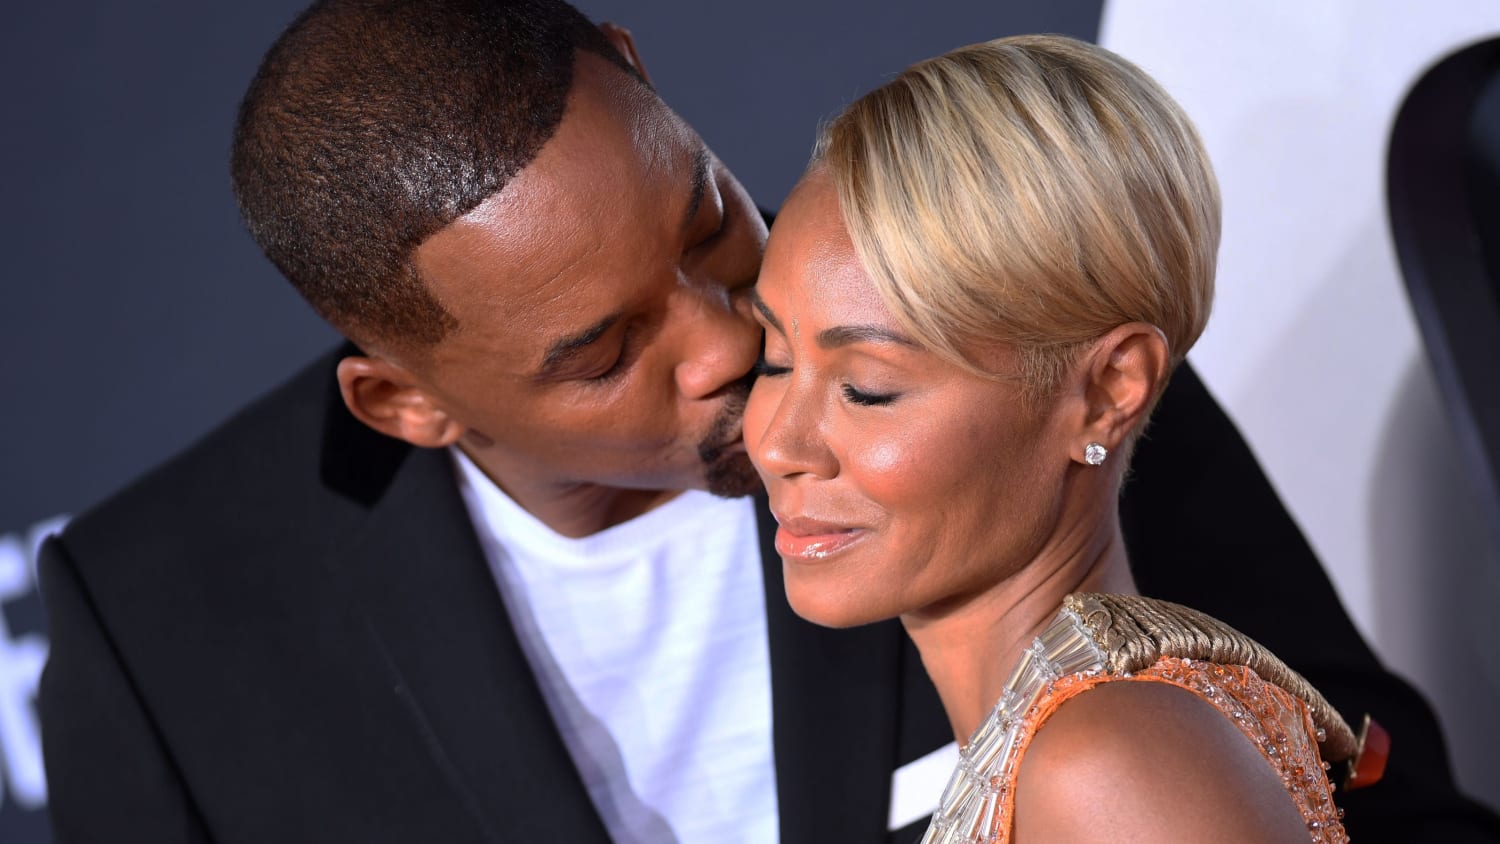 Jada Pinkett Smith and Will Smith confirm previous split, reveal details of August Alsina relationship